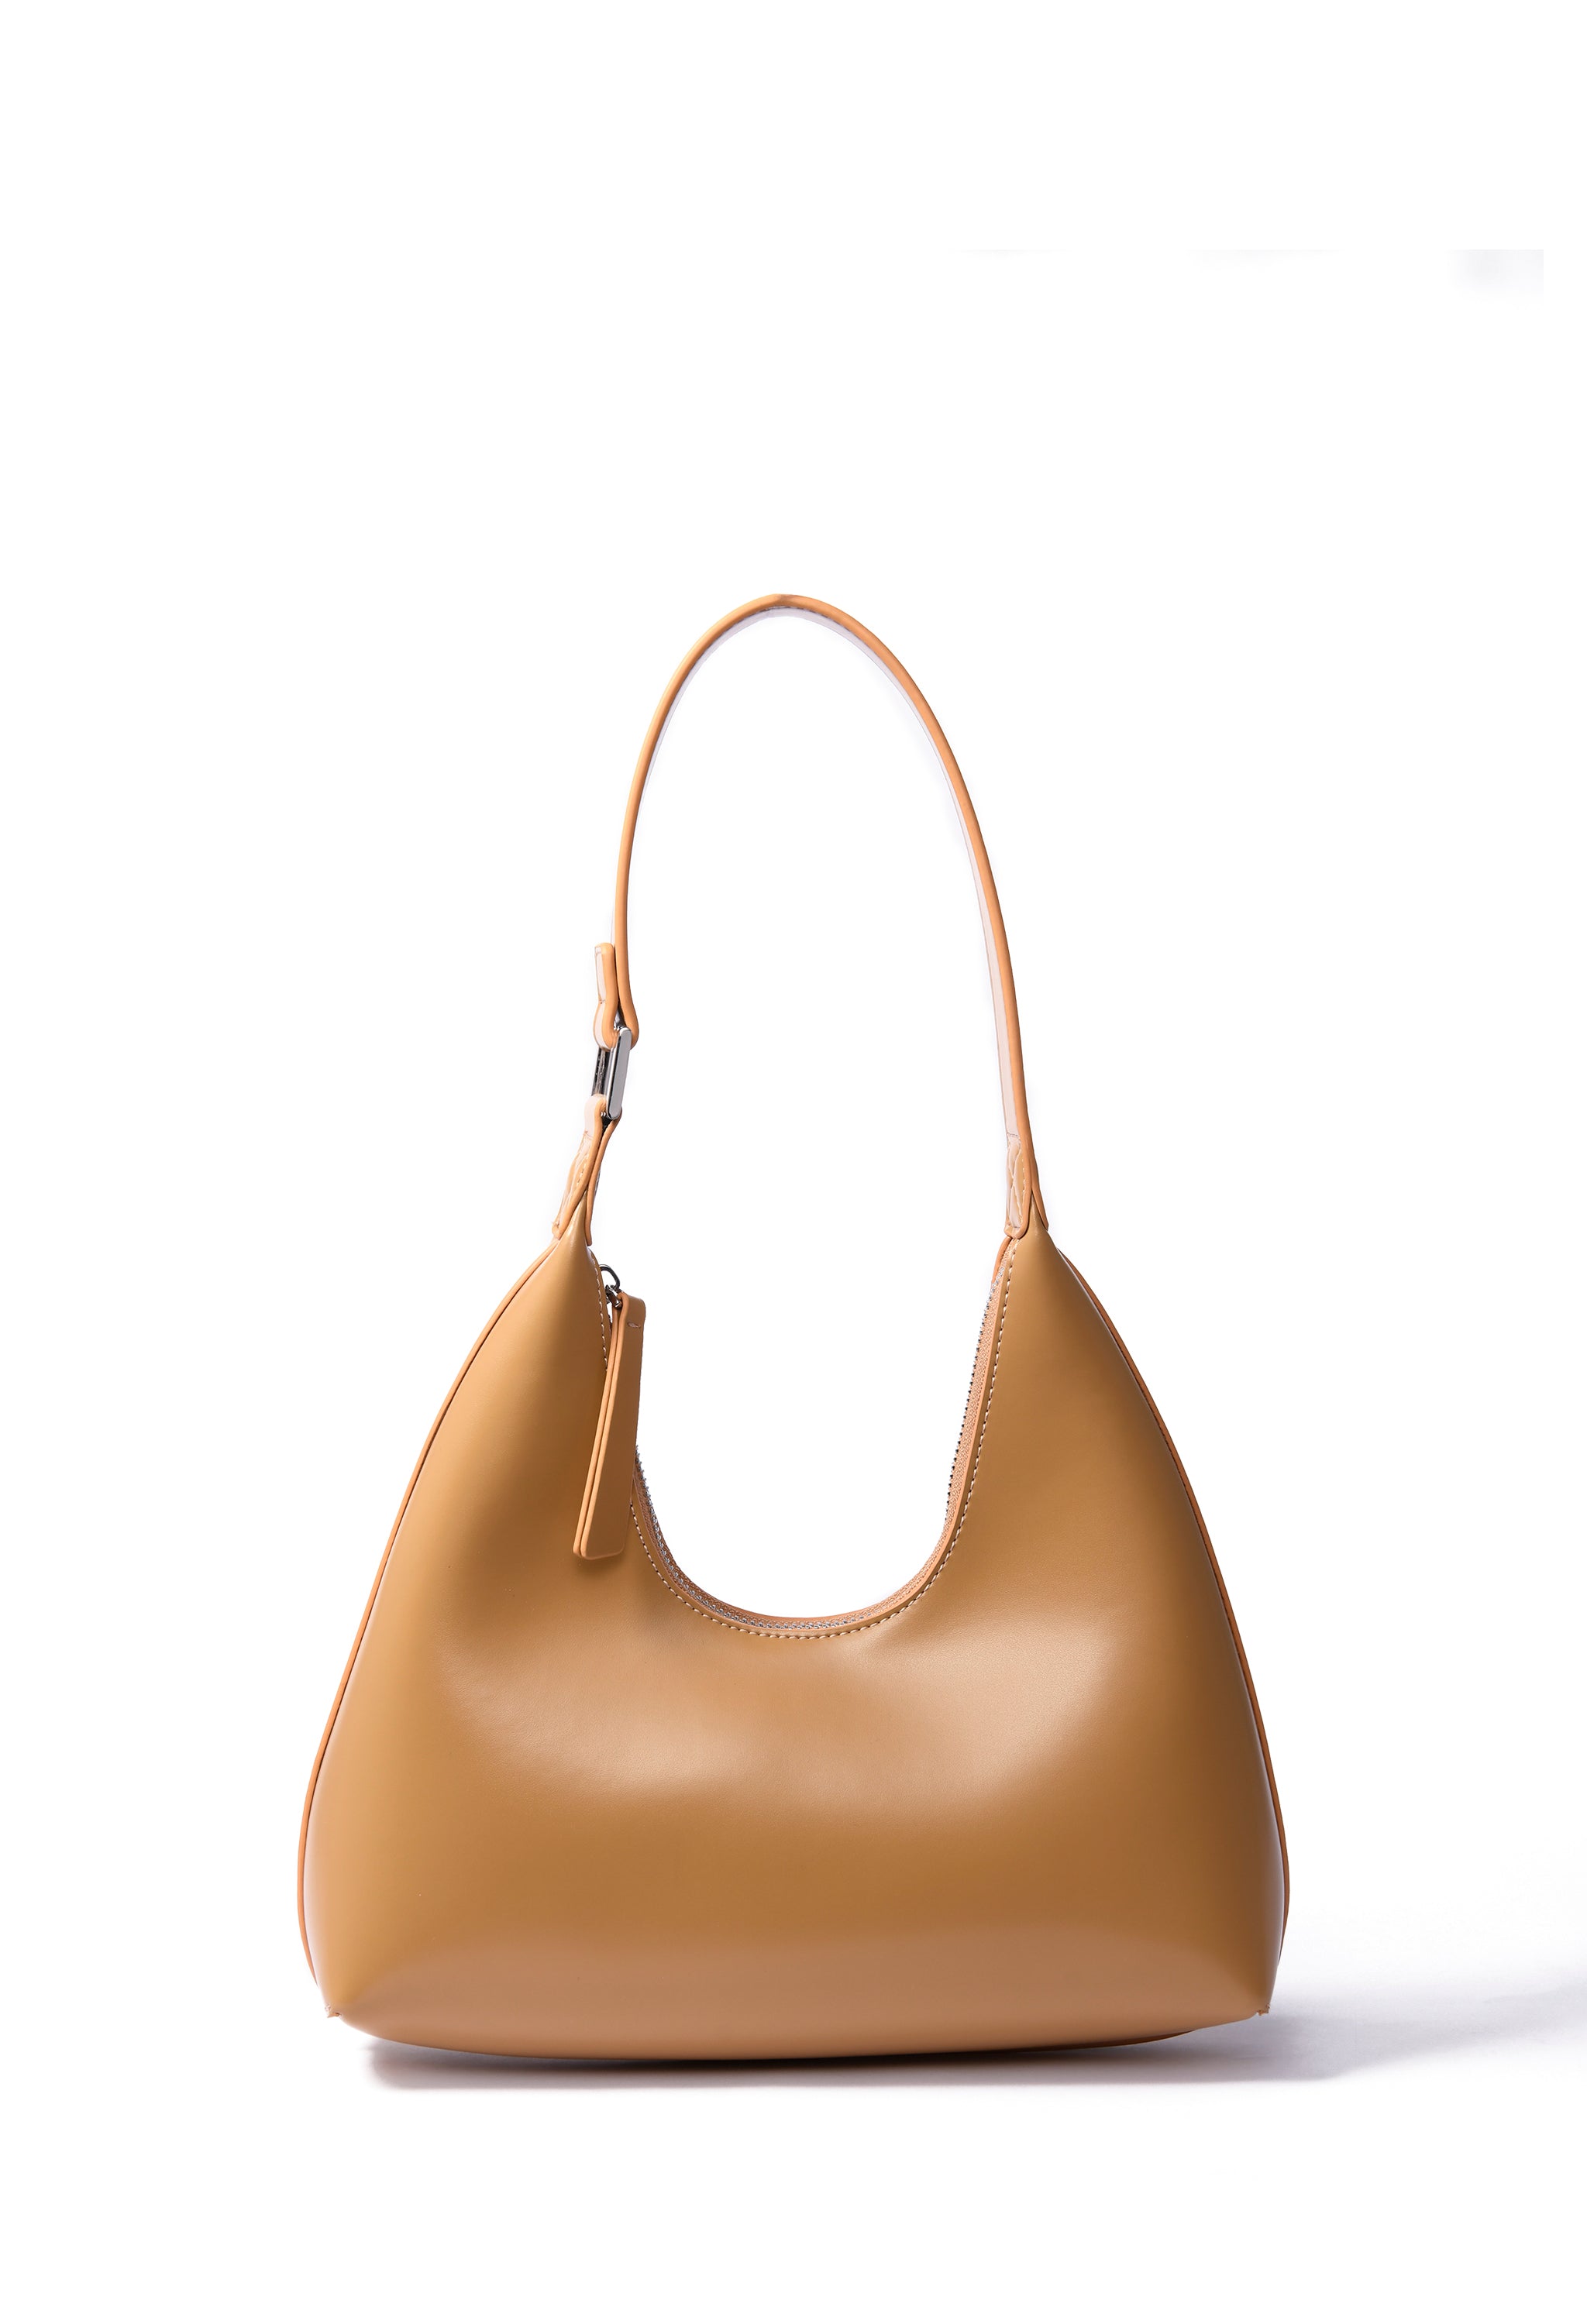 Alexia Bag in smooth leather, Yellow